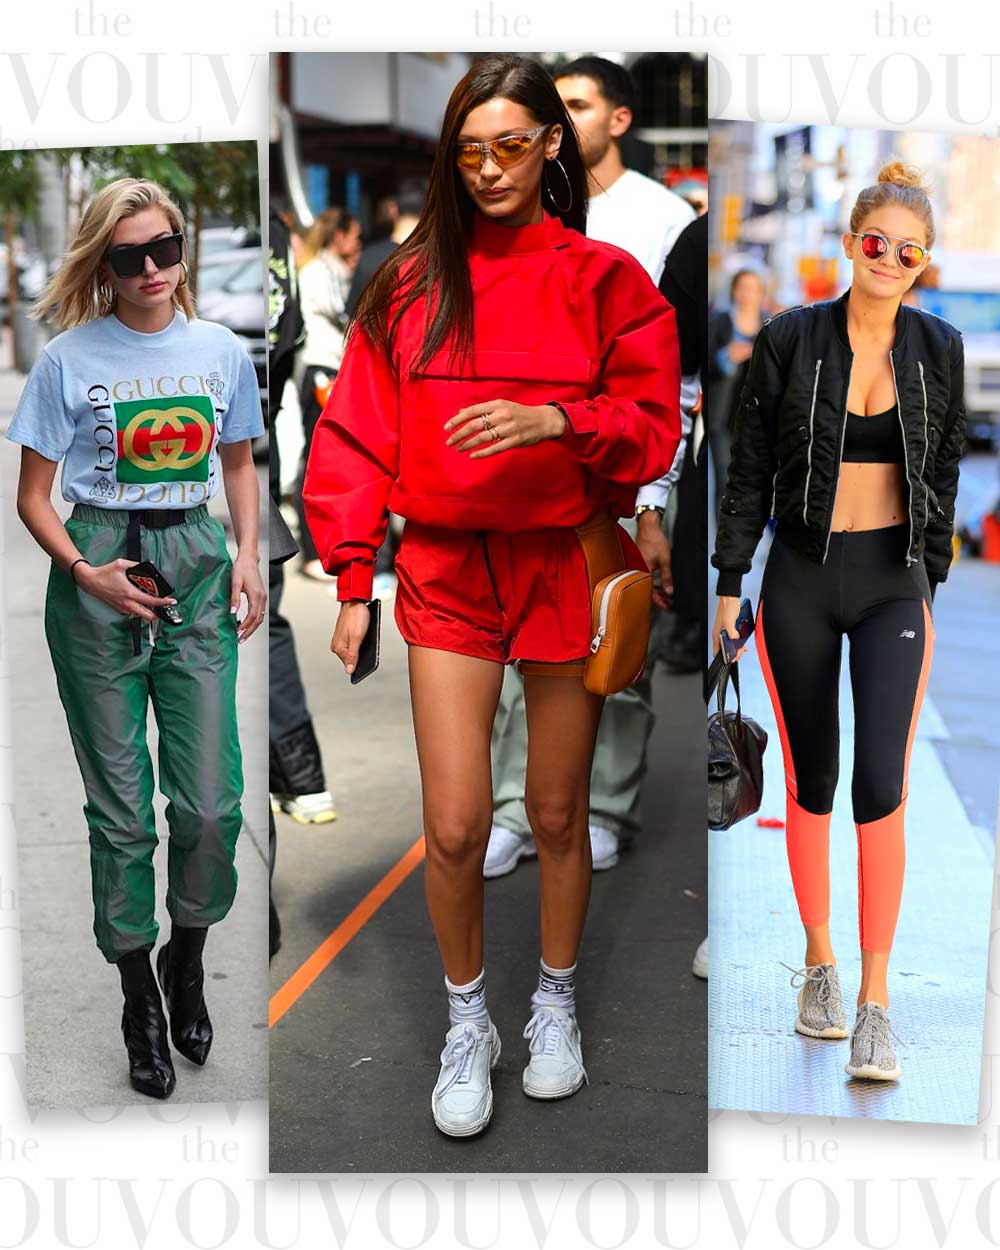 How to Dress in Streetwear Style? 10 Outfits for a Distinctive Look